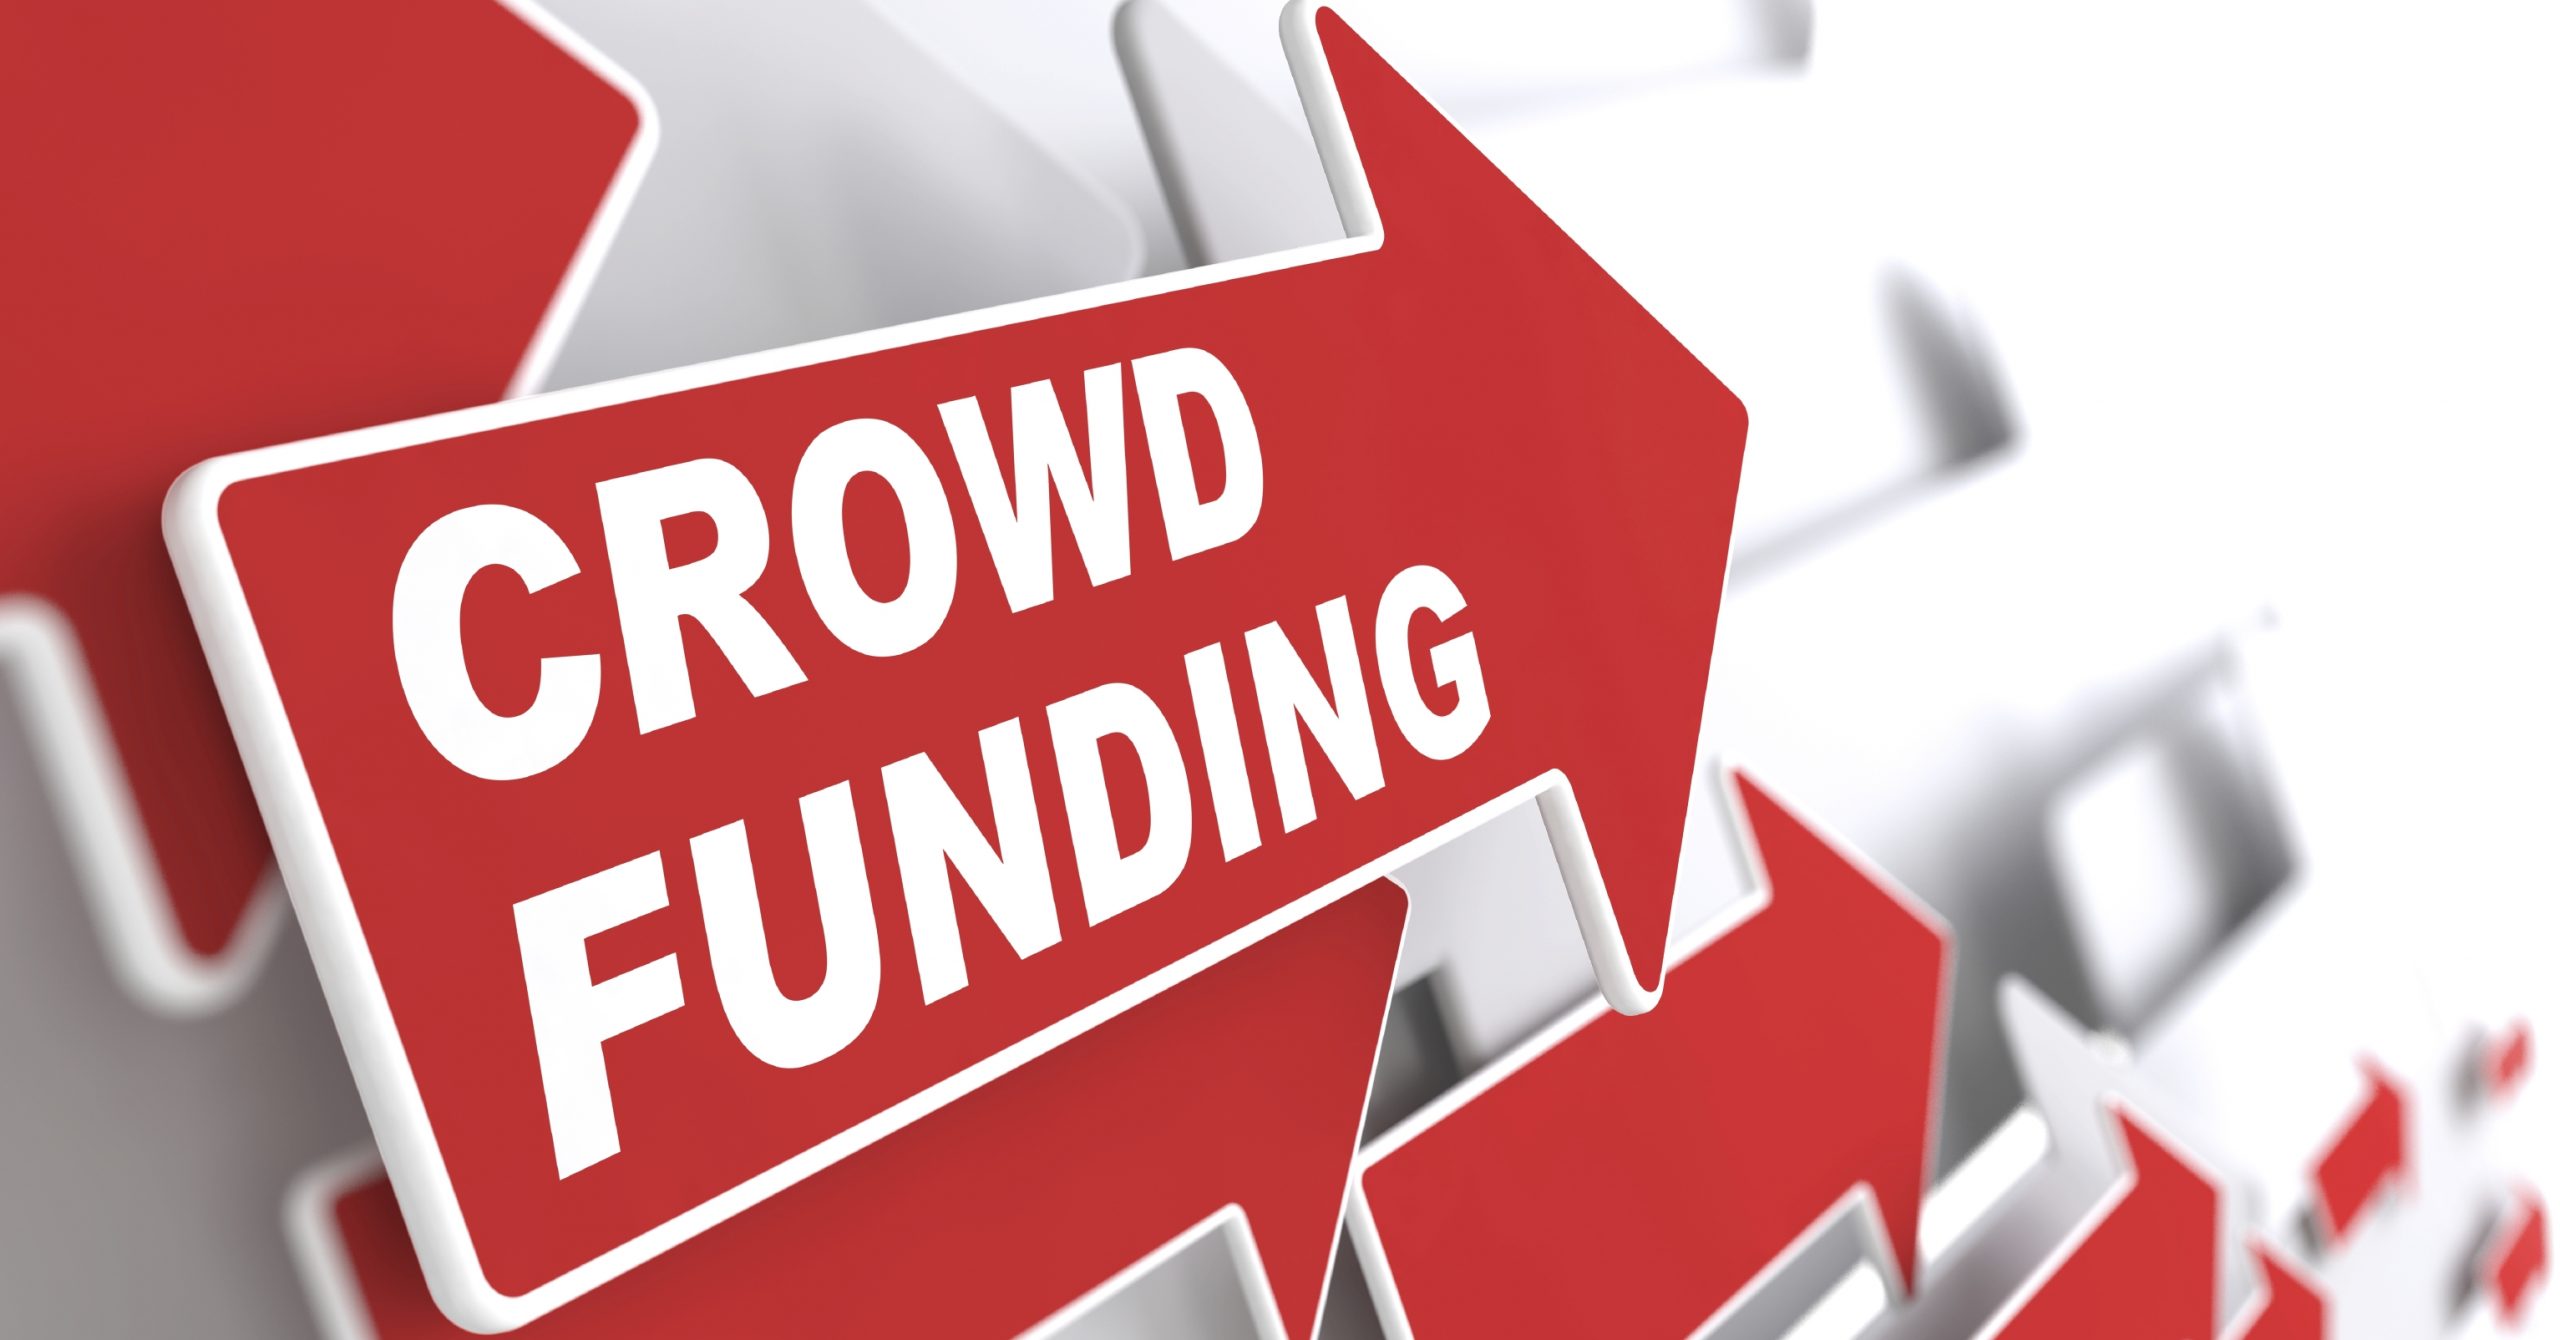 EC supports “crowdfunding” as financing source for start-ups